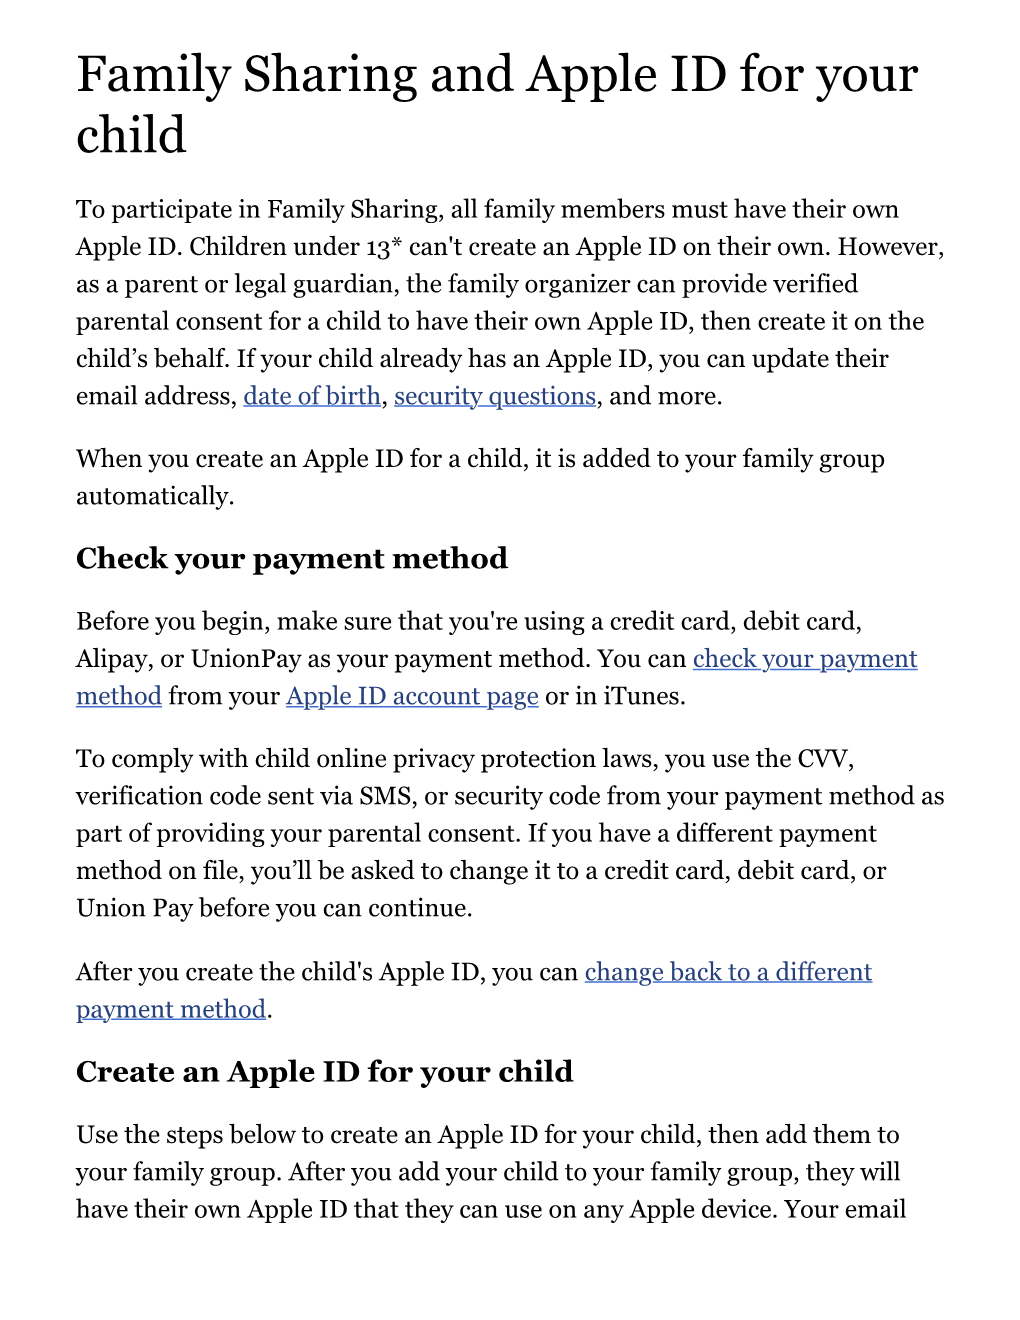 Family Sharing and Apple ID for Your Child